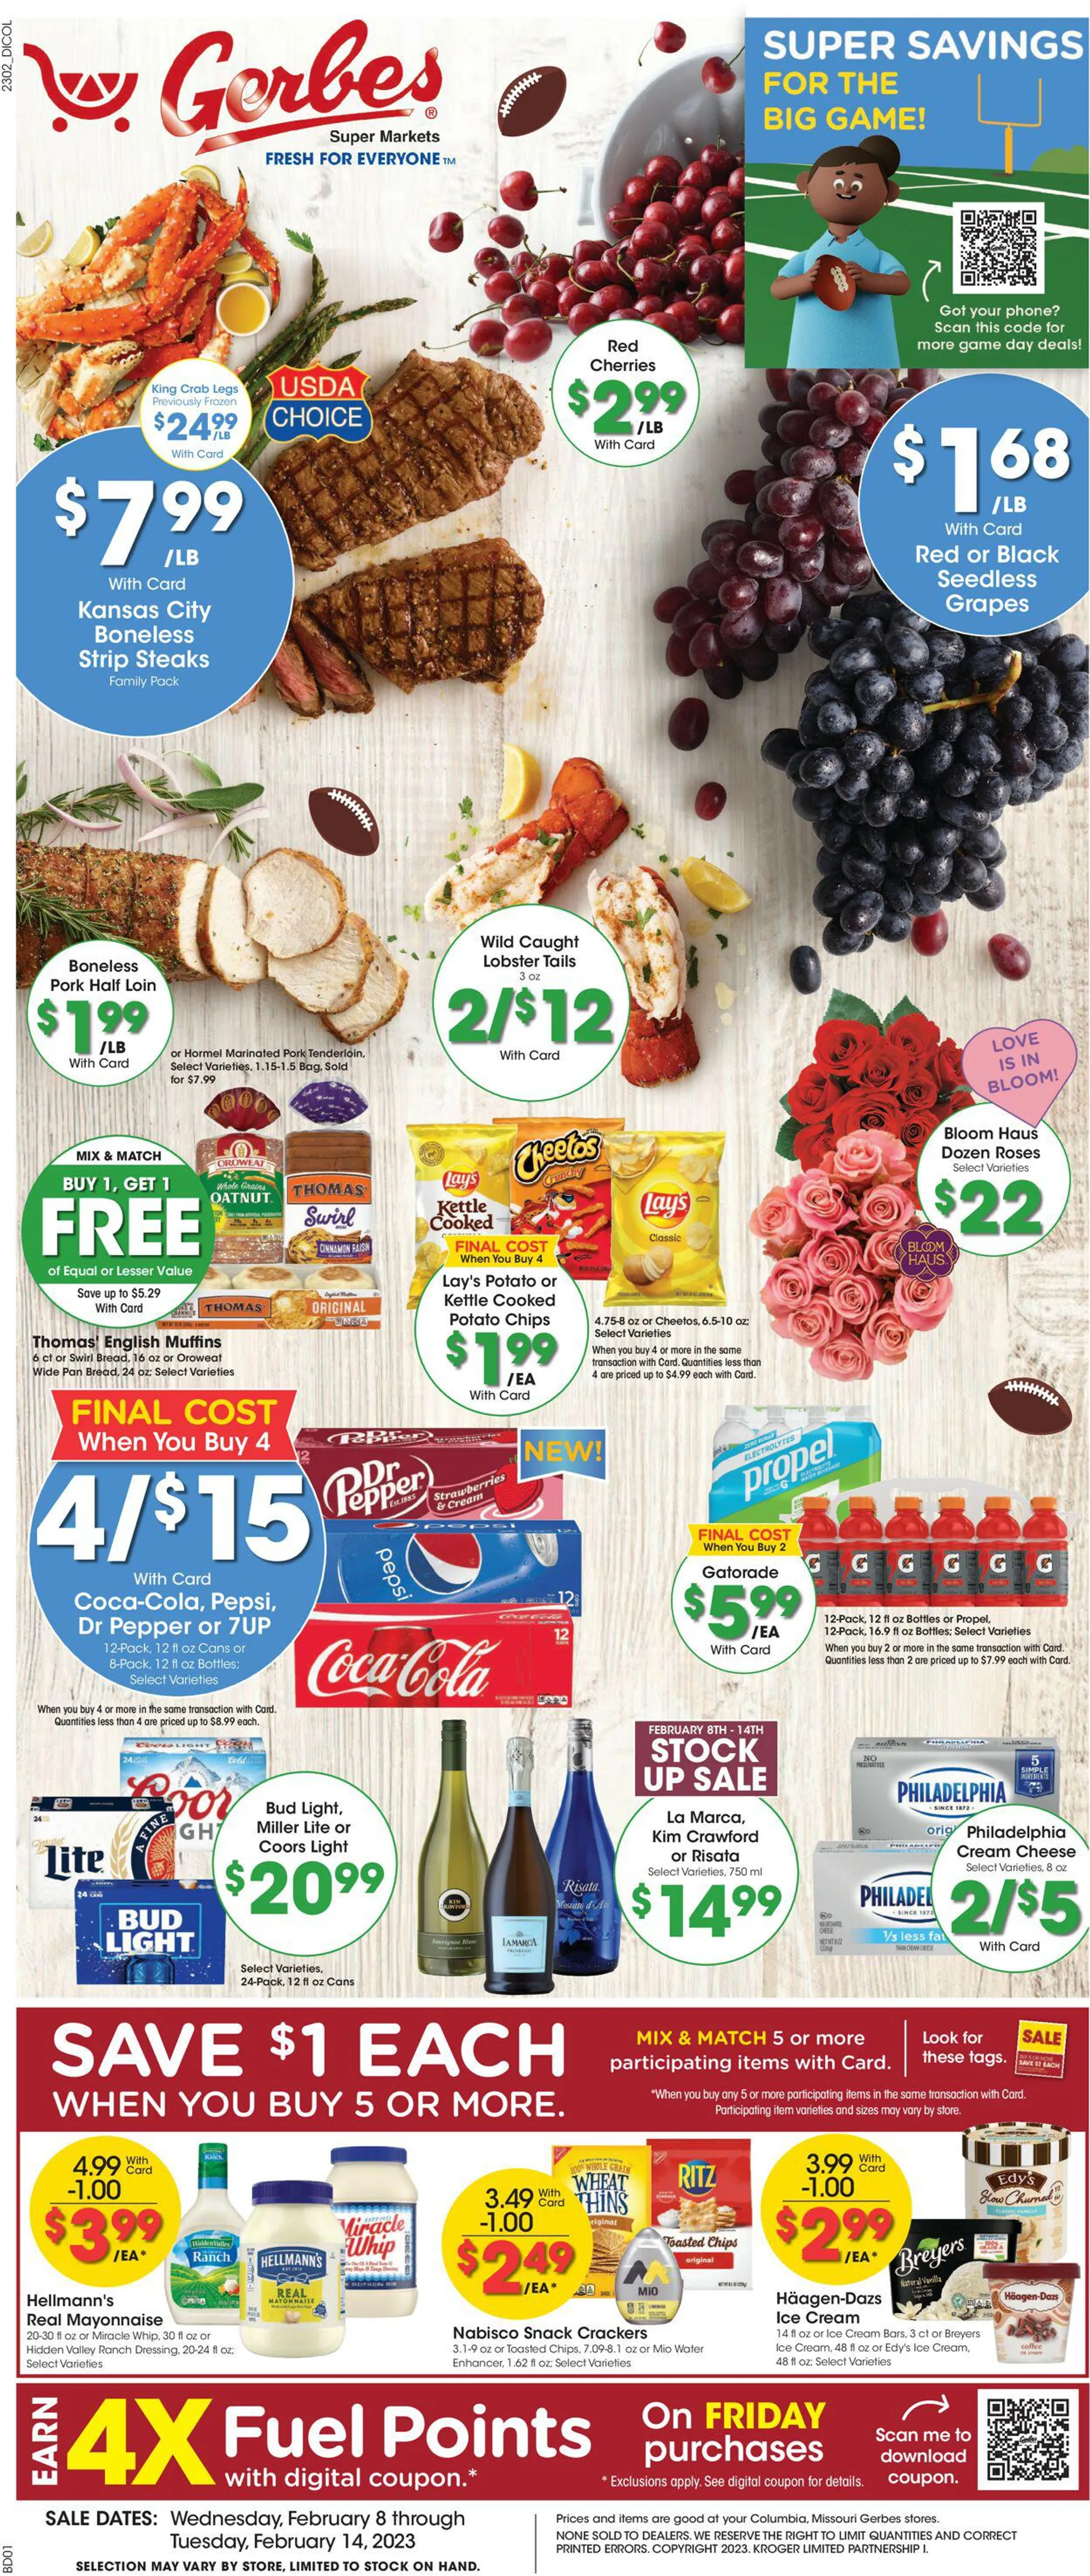 Gerbes Super Markets Current weekly ad - 1